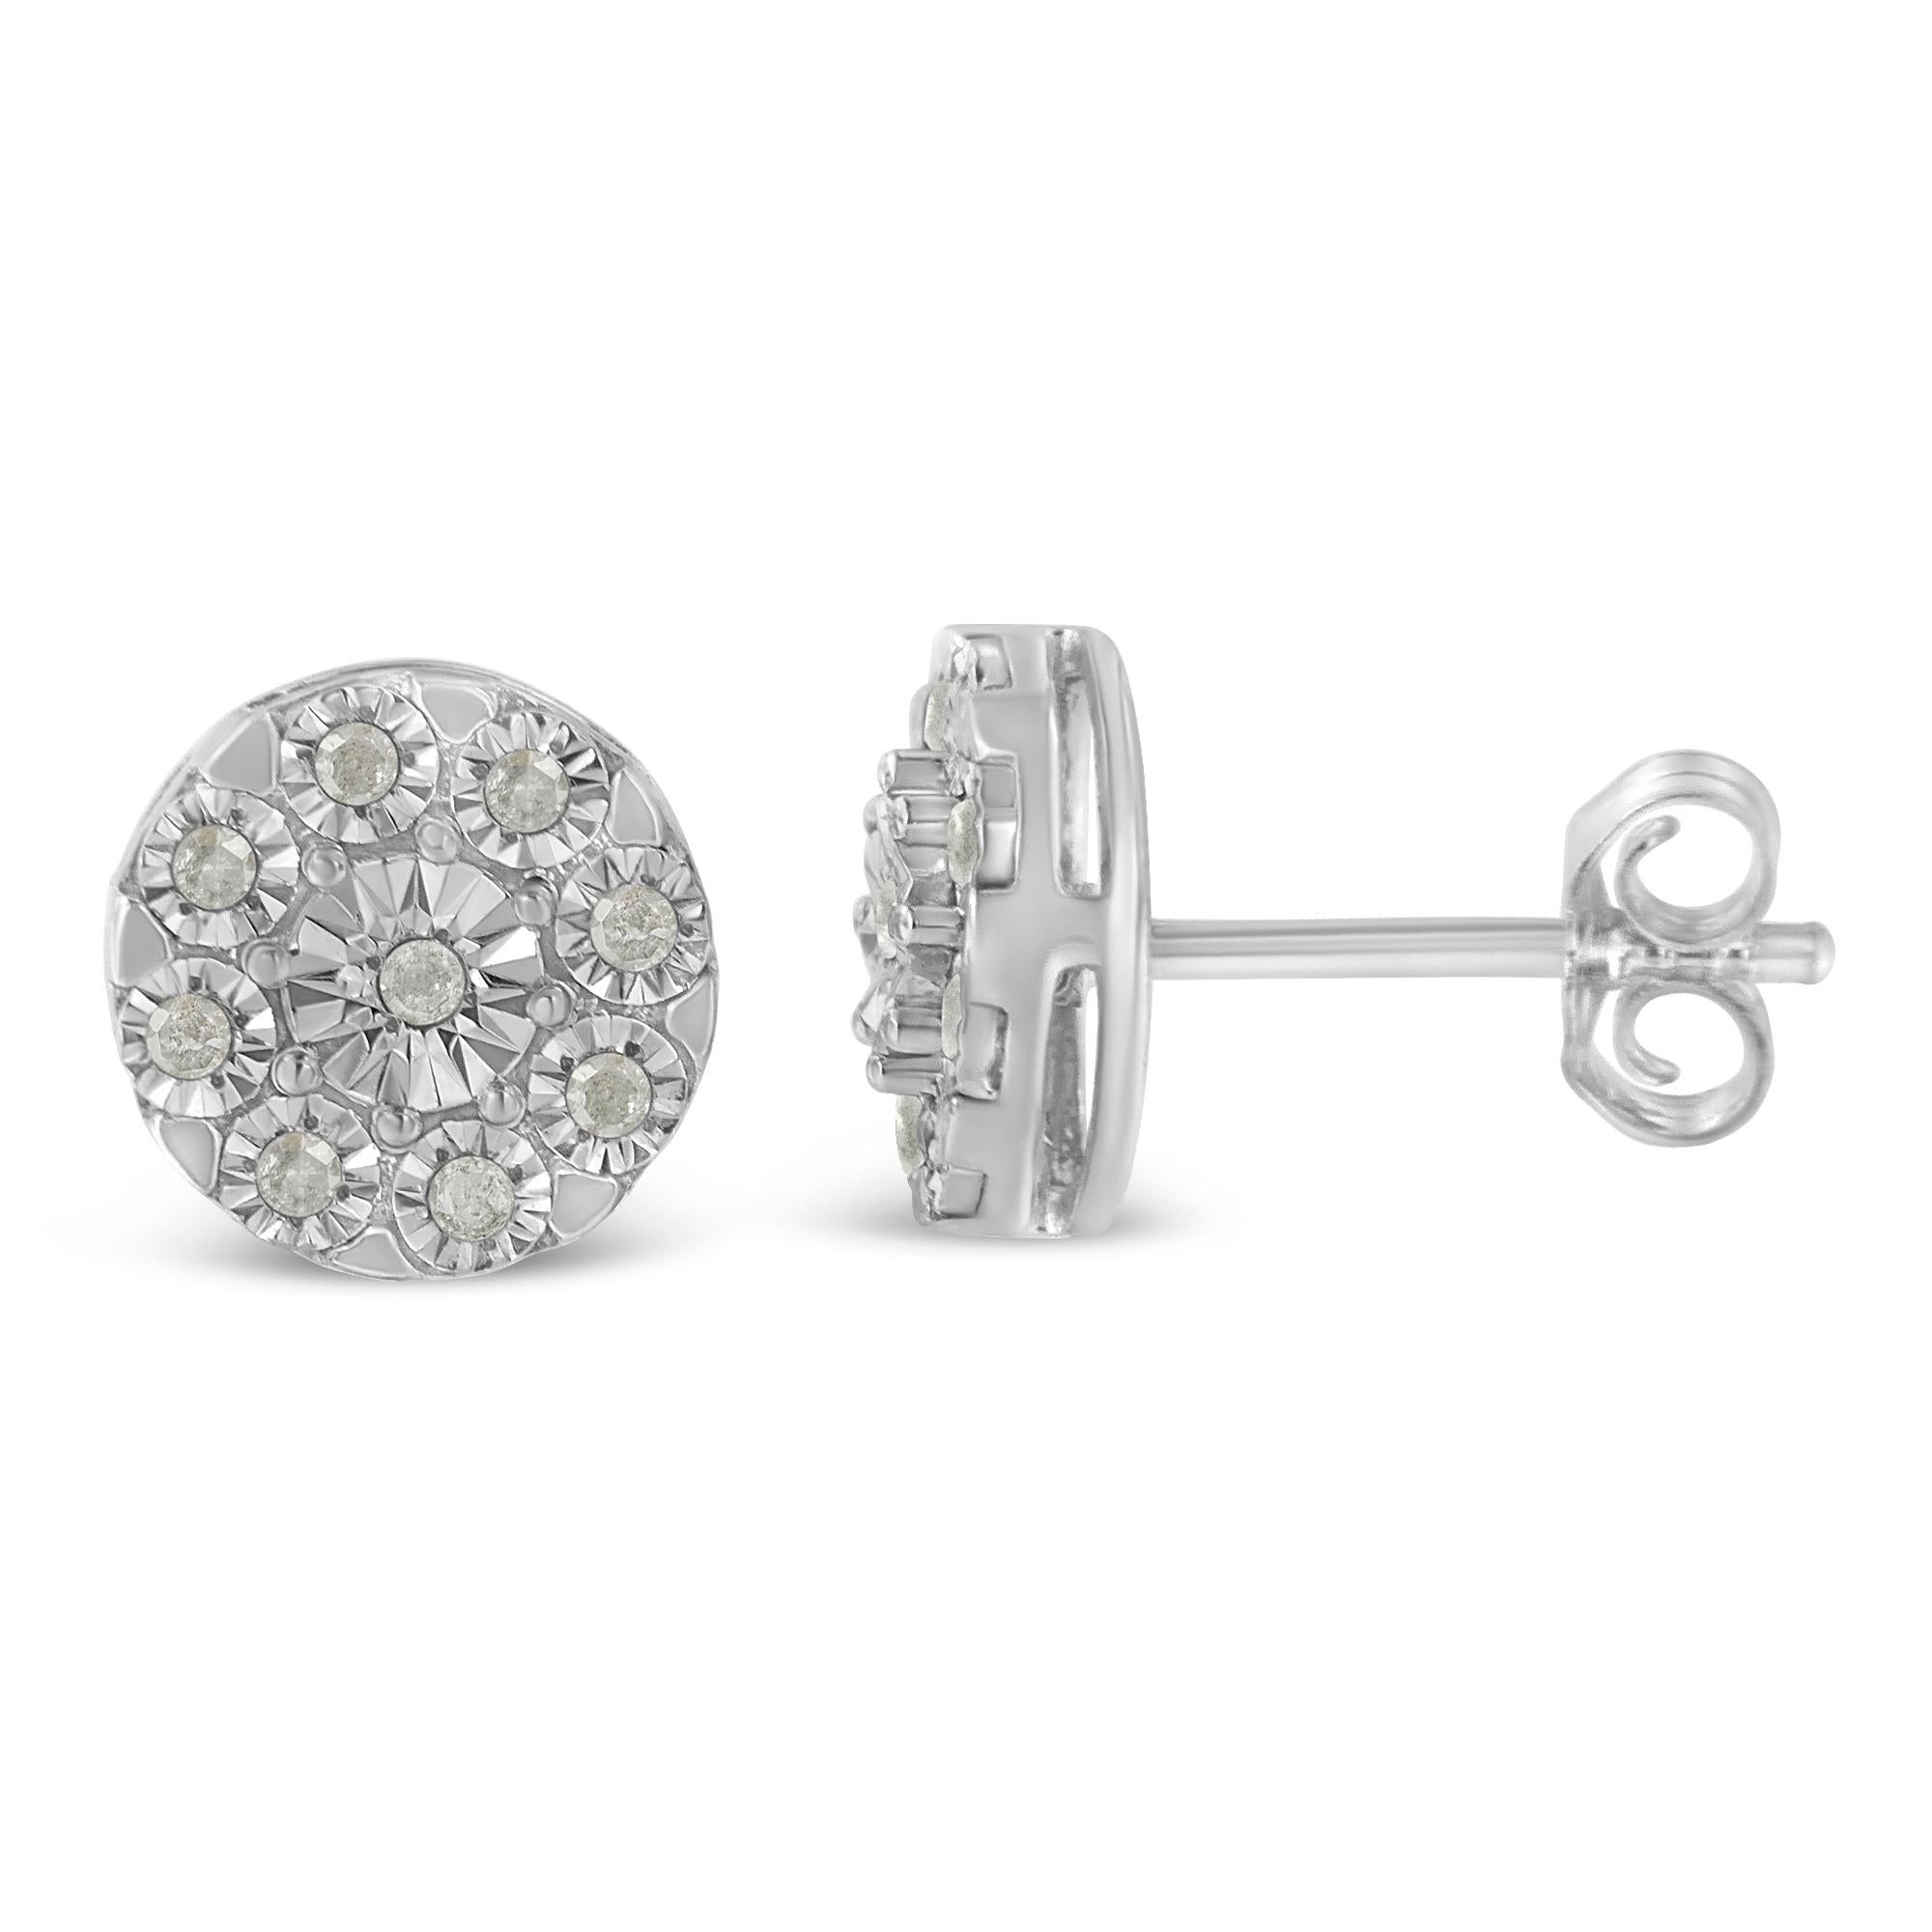 A cluster of nine sparkling, rose-cut white diamonds form a flower shape on each of these charming stud earrings. Highly polished to perfection, these earrings are crafted of shining sterling silver and come with push backs for a secure fit.